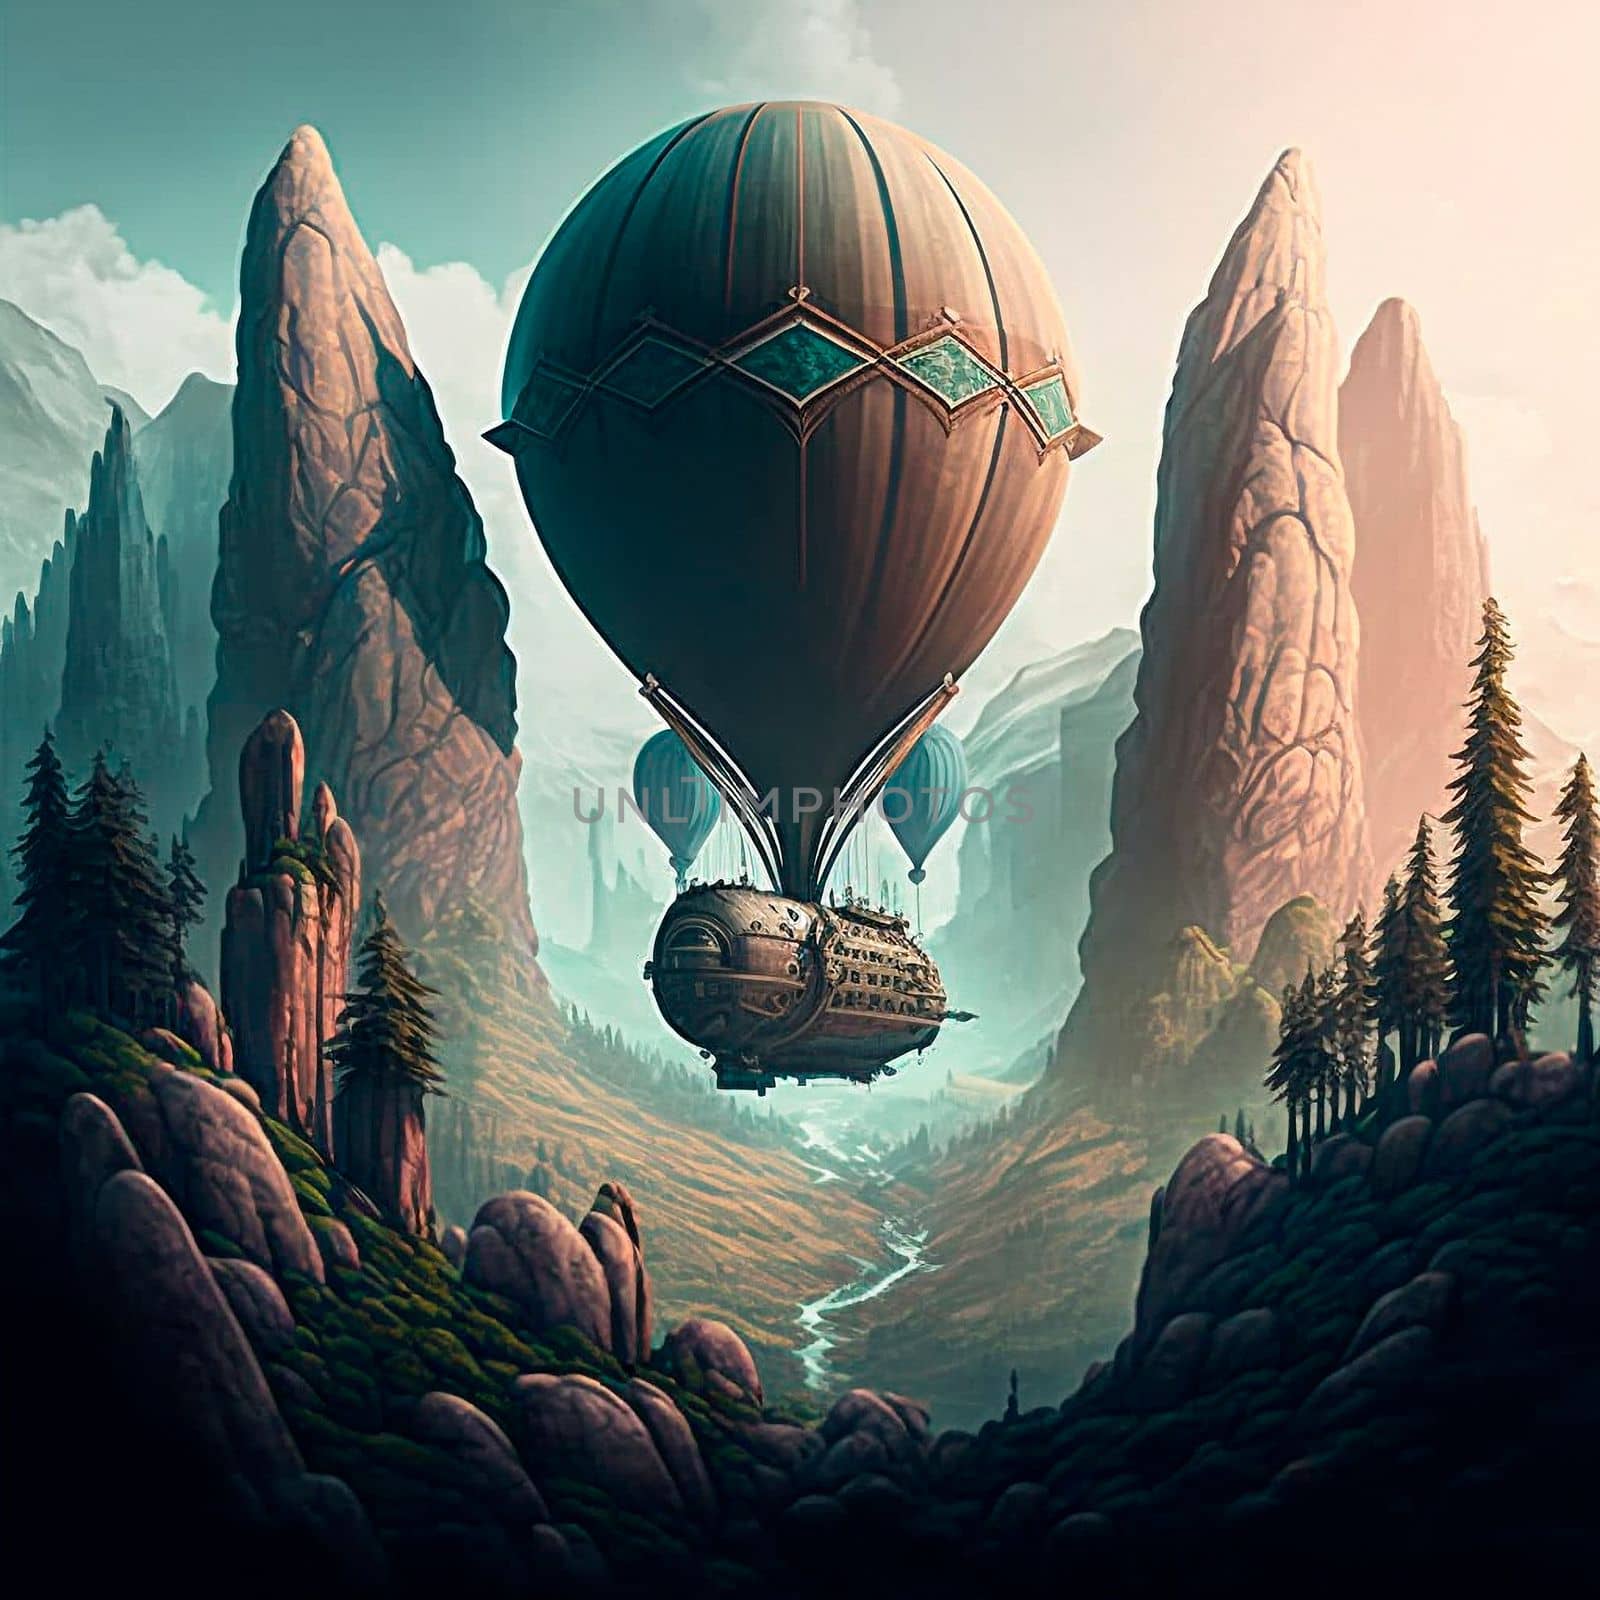 A huge airship flying in the mountains. High quality illustration